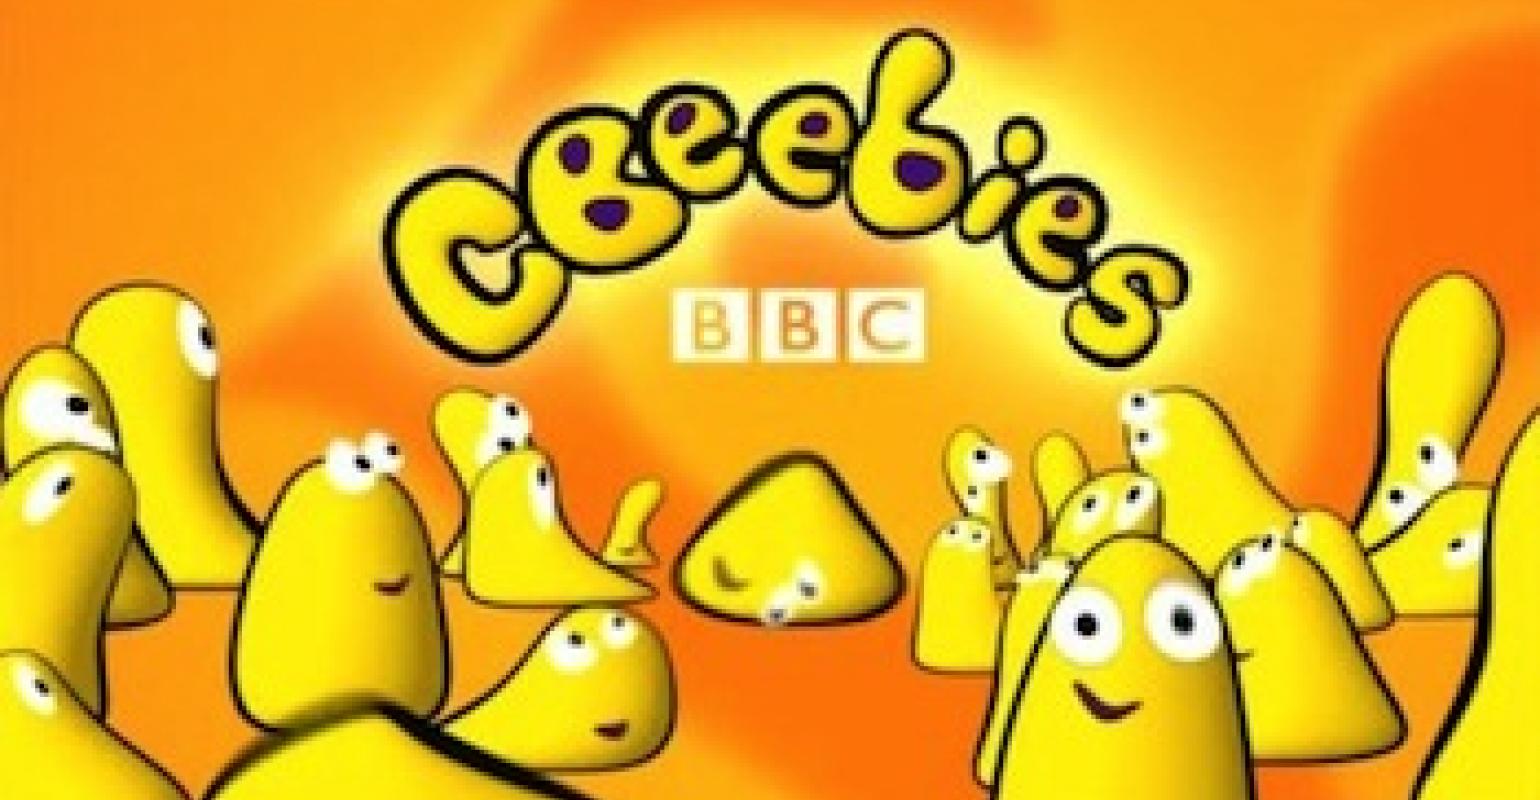 Sponsored: Cbeebies Launches On Startimes Across Africa From 1st July 2020